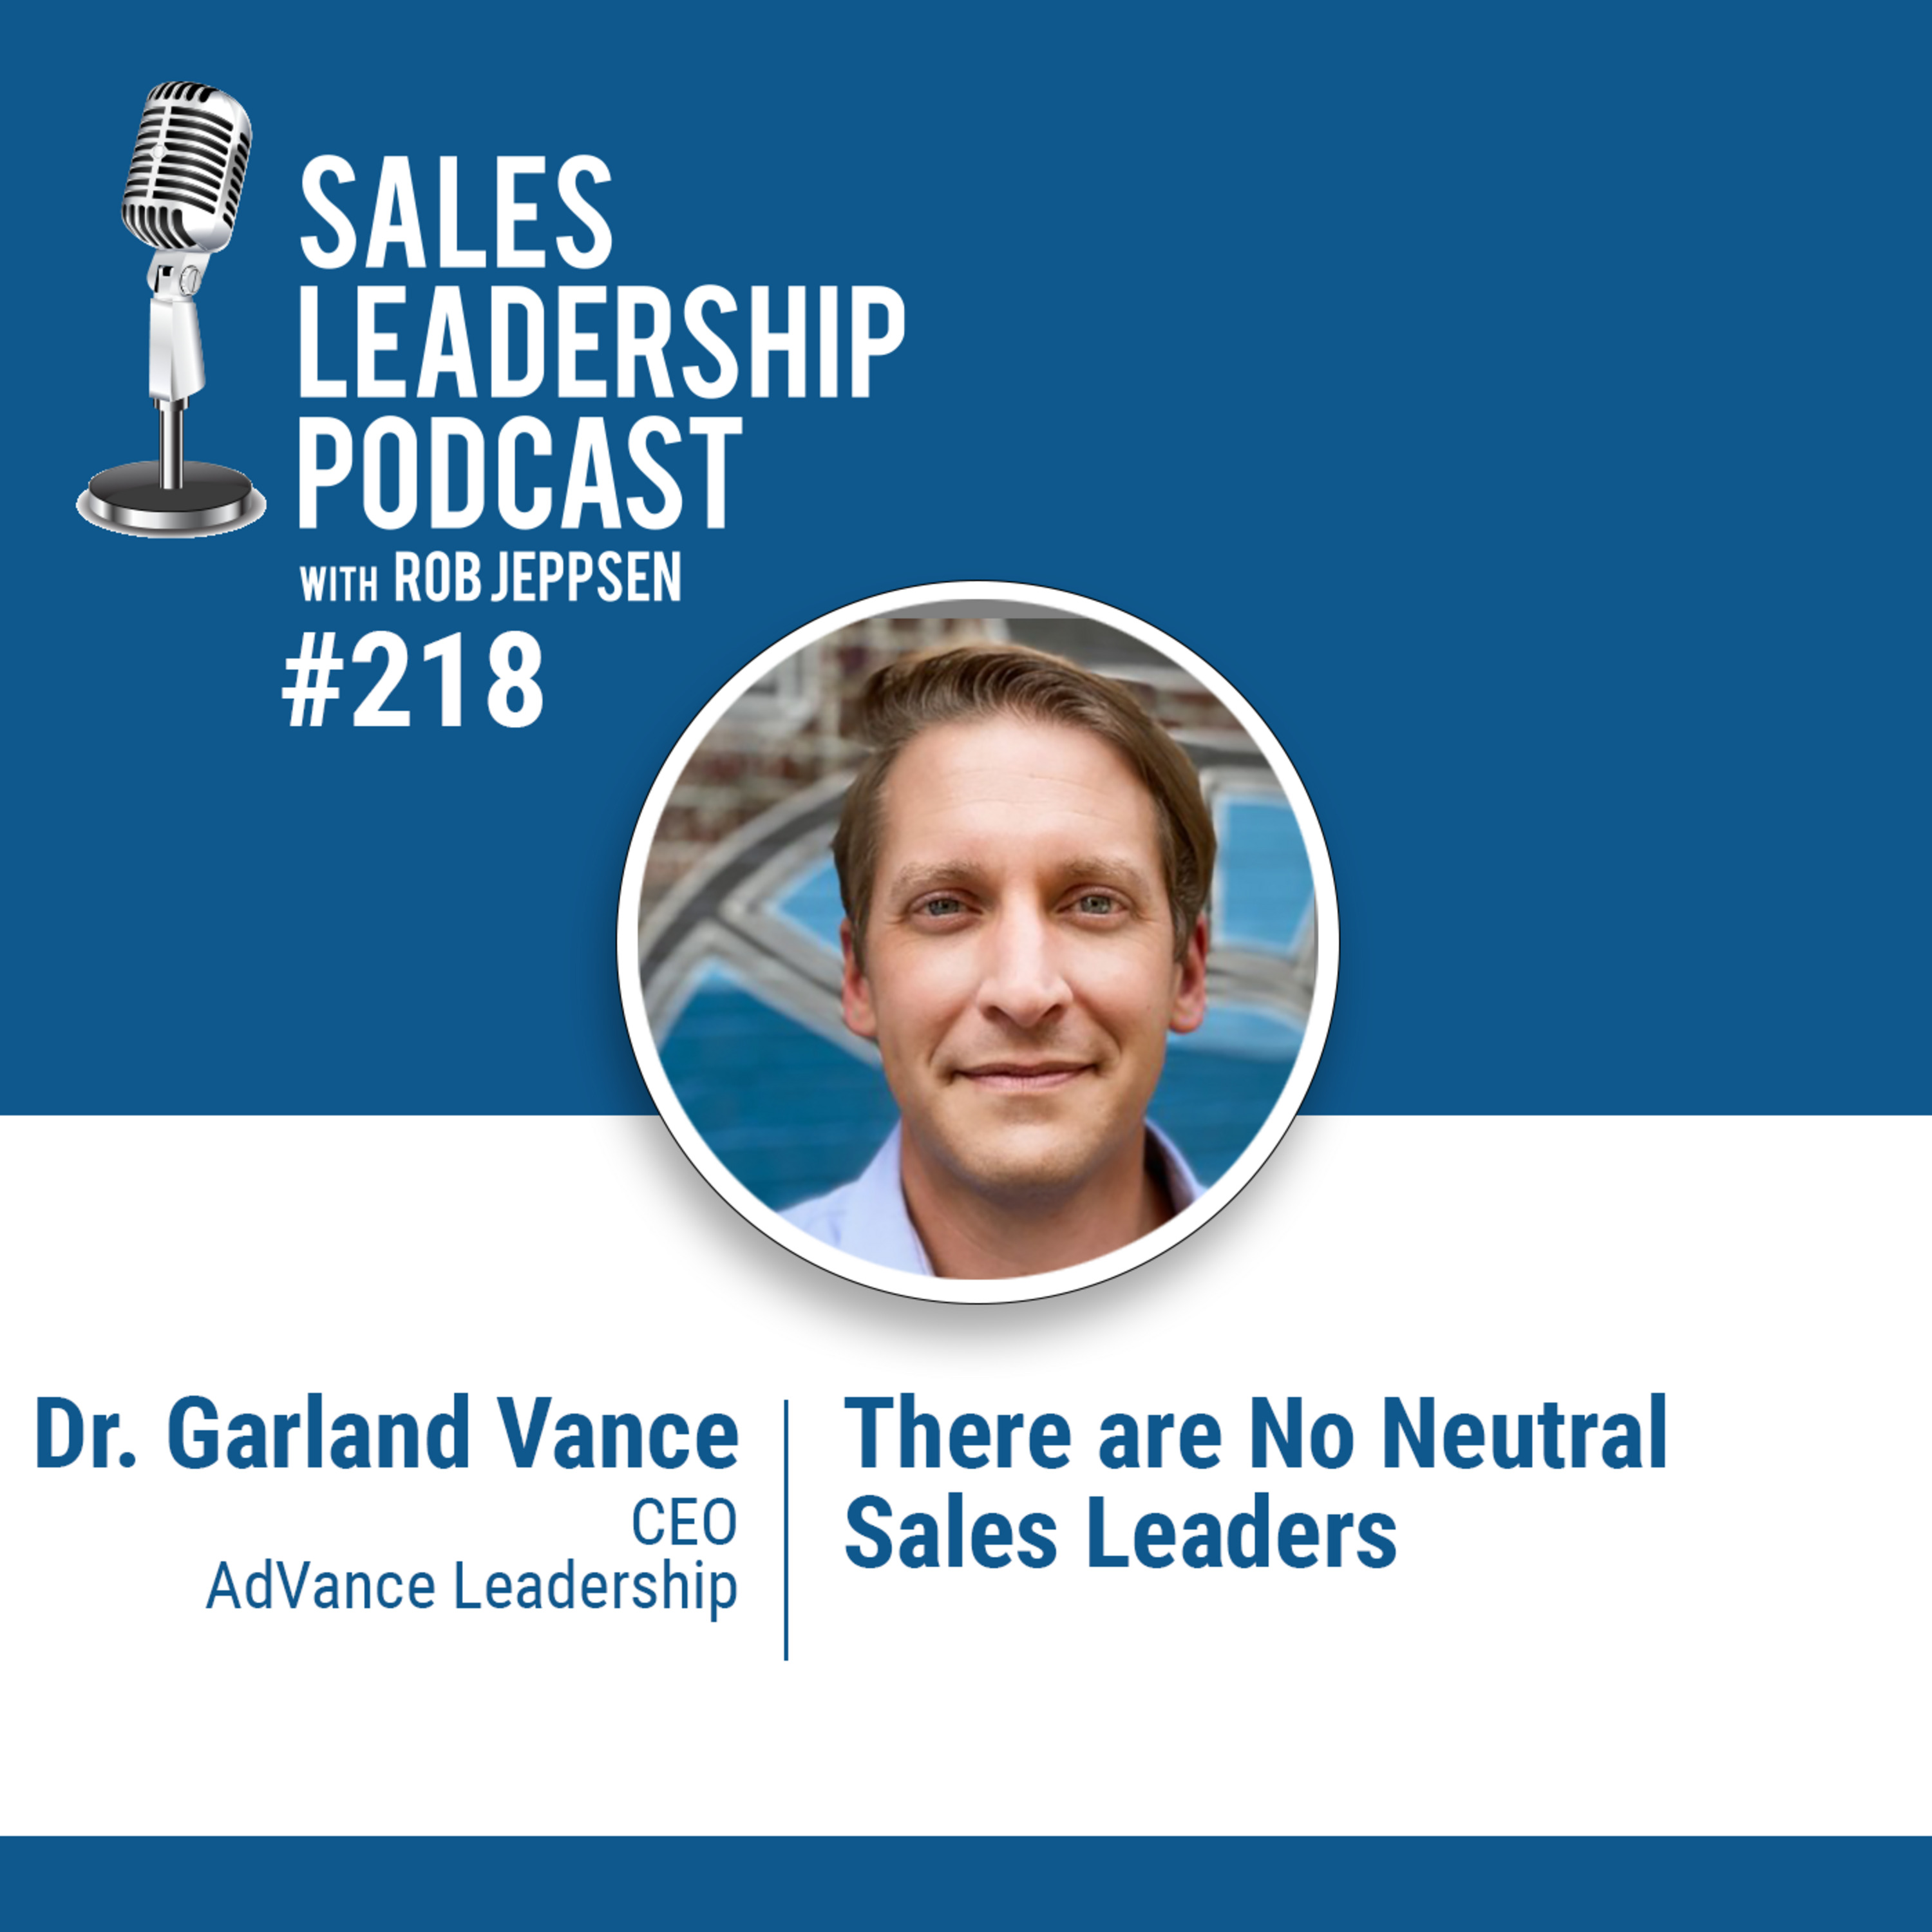 Episode 219: #218:Dr. Garland Vance, CEO of AdVance Leadership  —  There are No Neutral Sales Leaders.